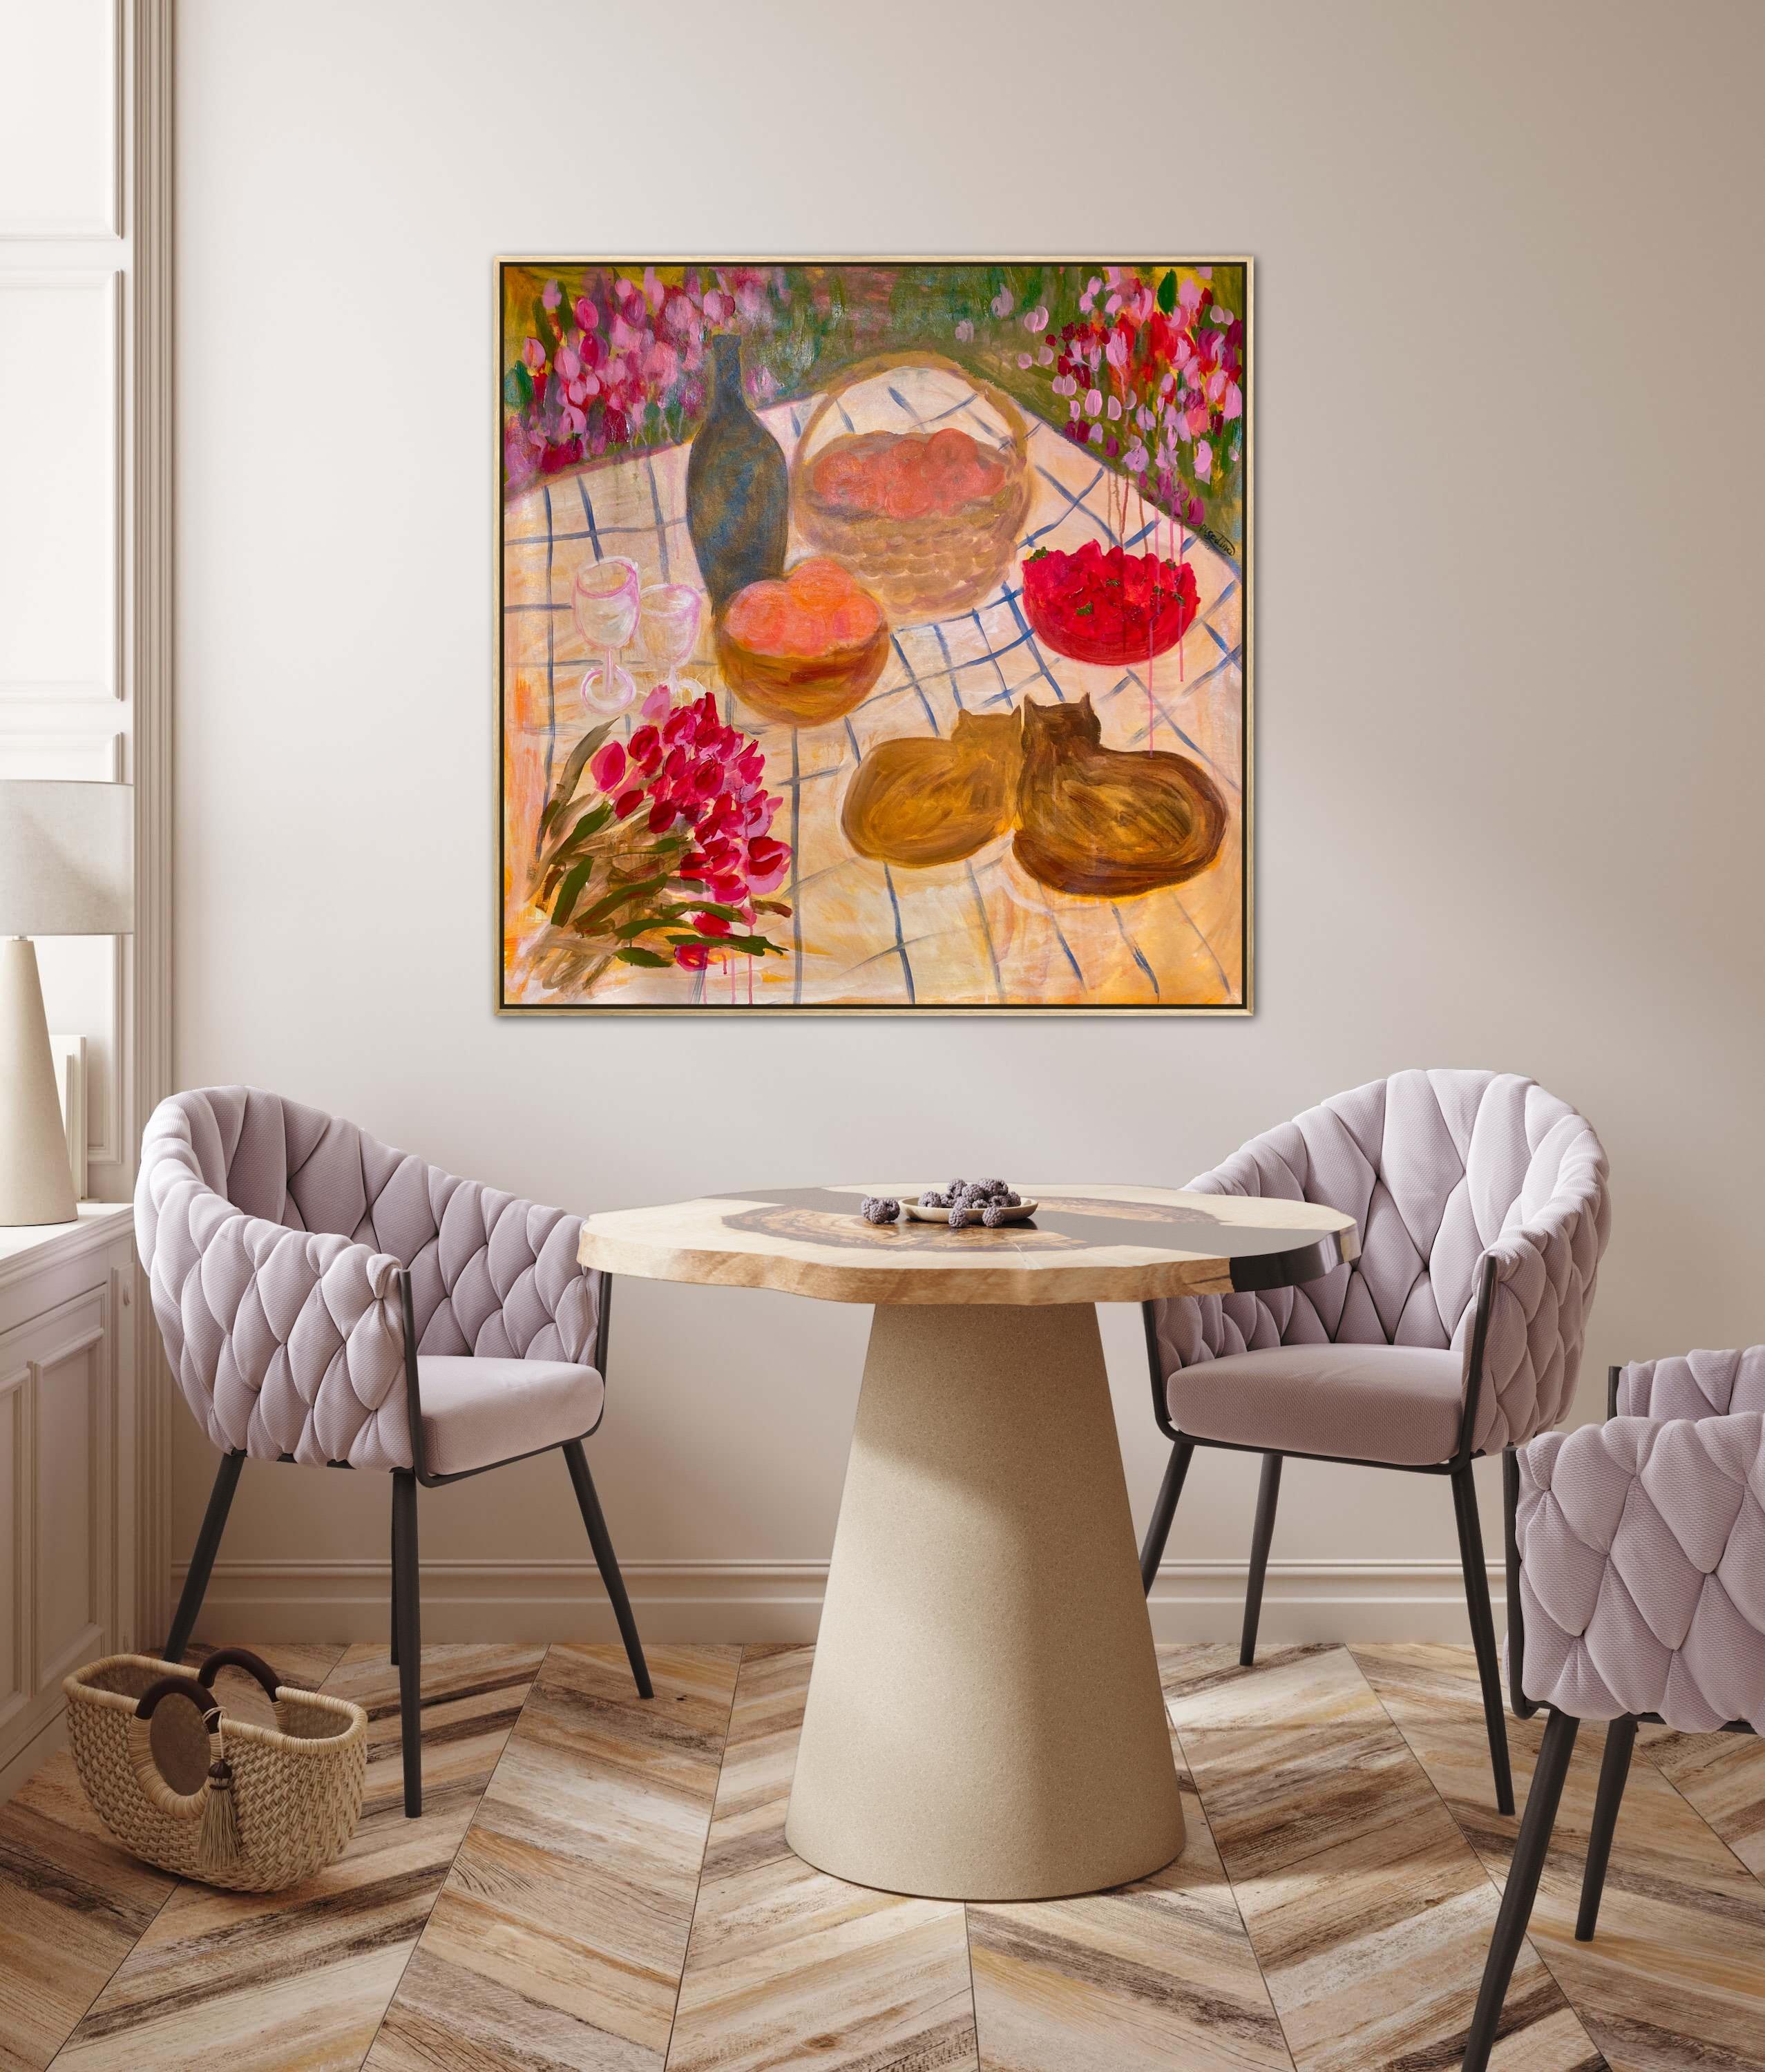 This painting will come to you stretched on a wooden stretcher and completely ready to be placed in the interior.

ABOUT THE ARTWORK
'Let's Eat, Honey' is a celebration of the shared moments that become the flavor of our lives. This painting is